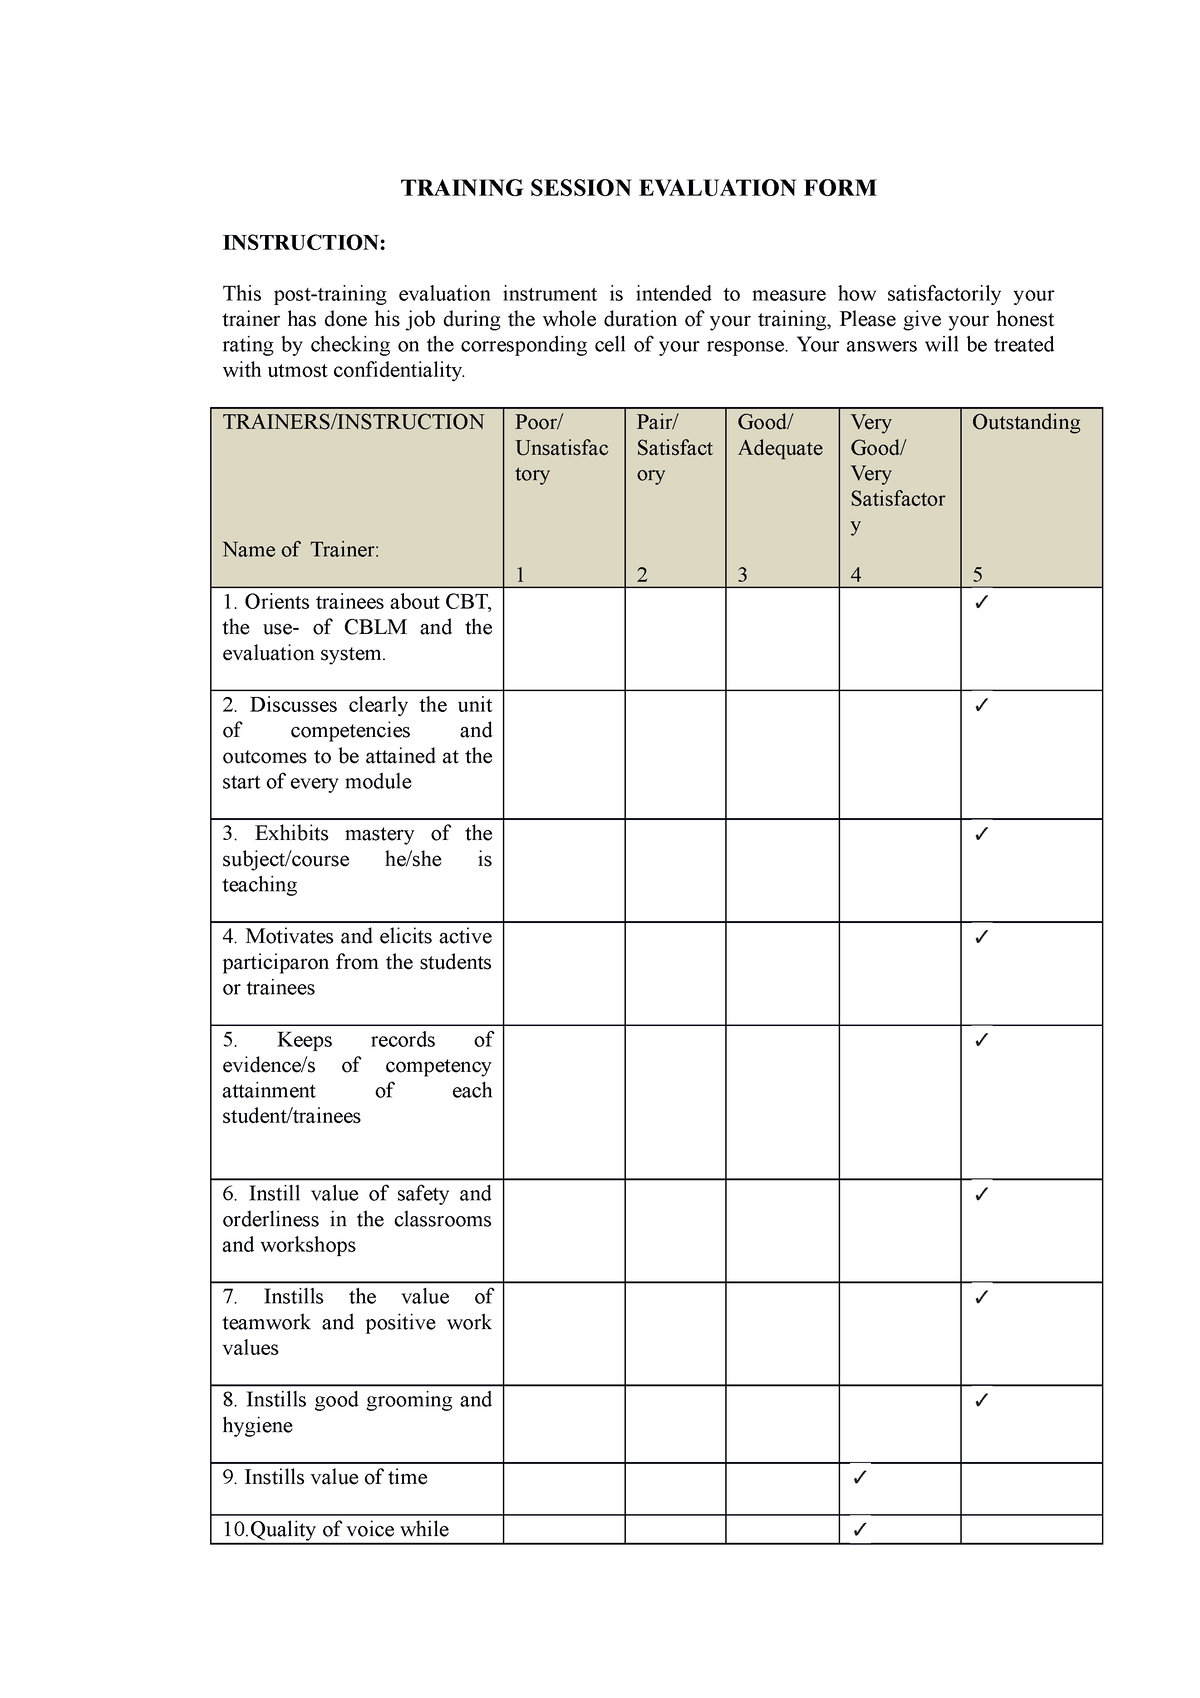 Rising orgnic chicken - Copy - TRAINING SESSION EVALUATION FORM ...